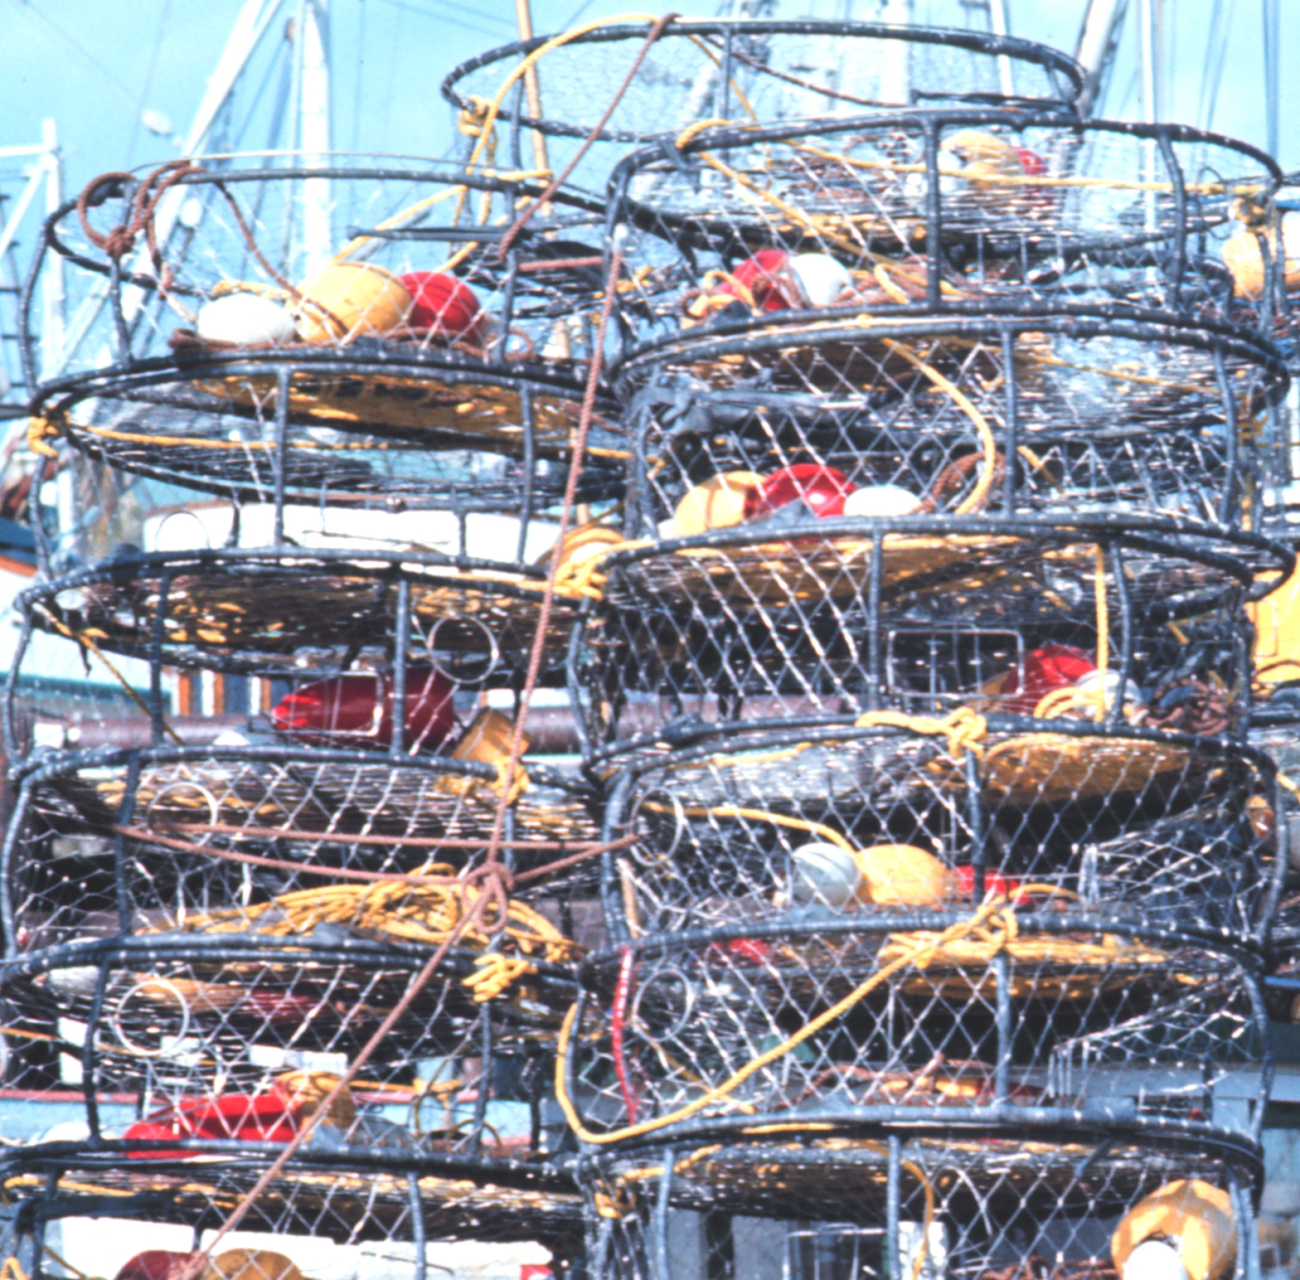 Crab traps on the dock